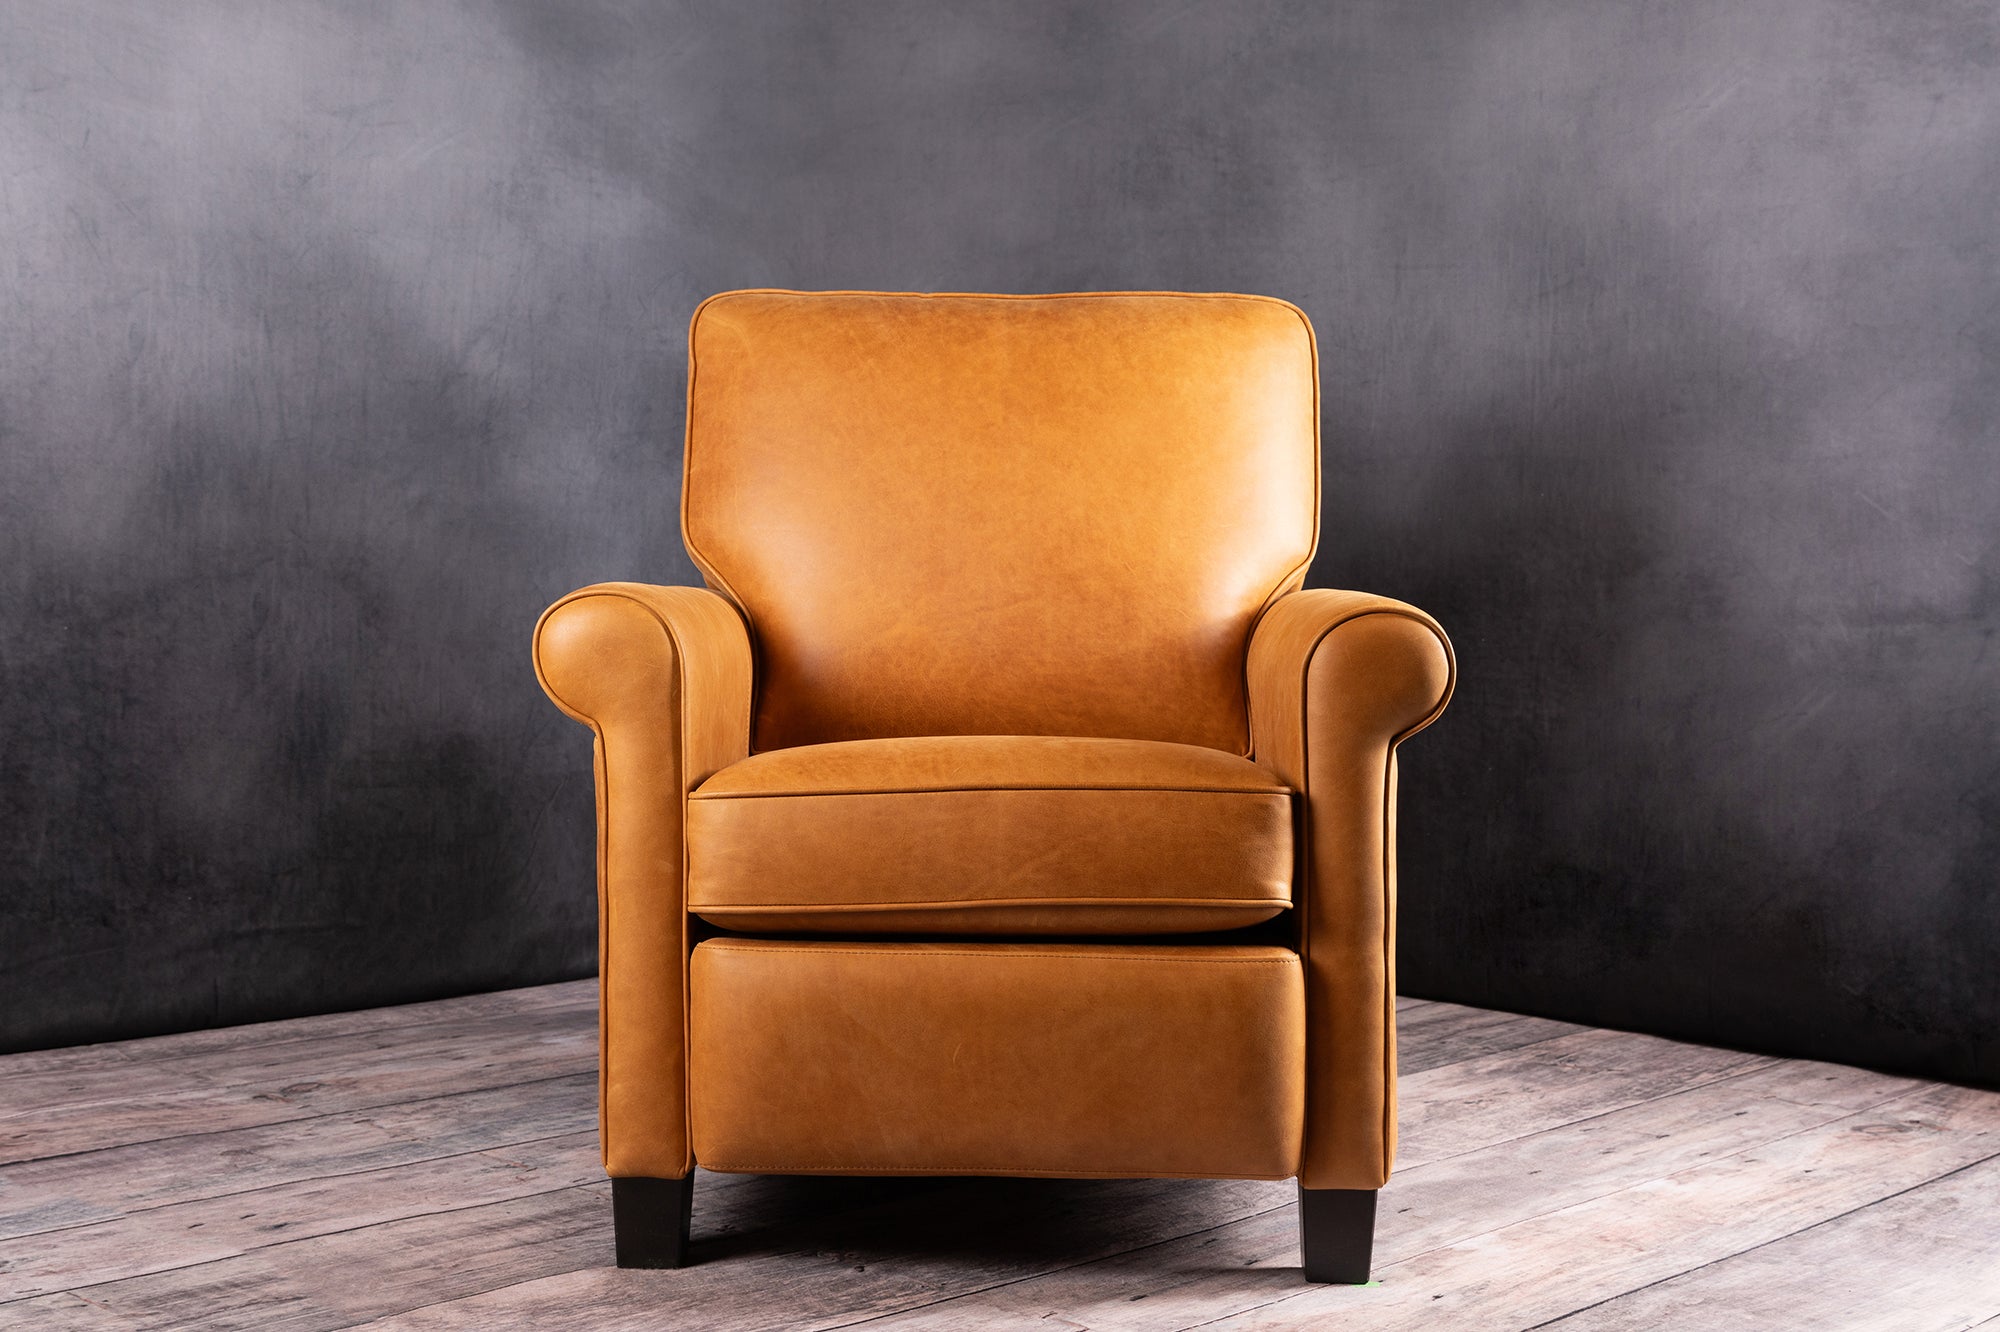 CHICAGO RECLINER CHAIR